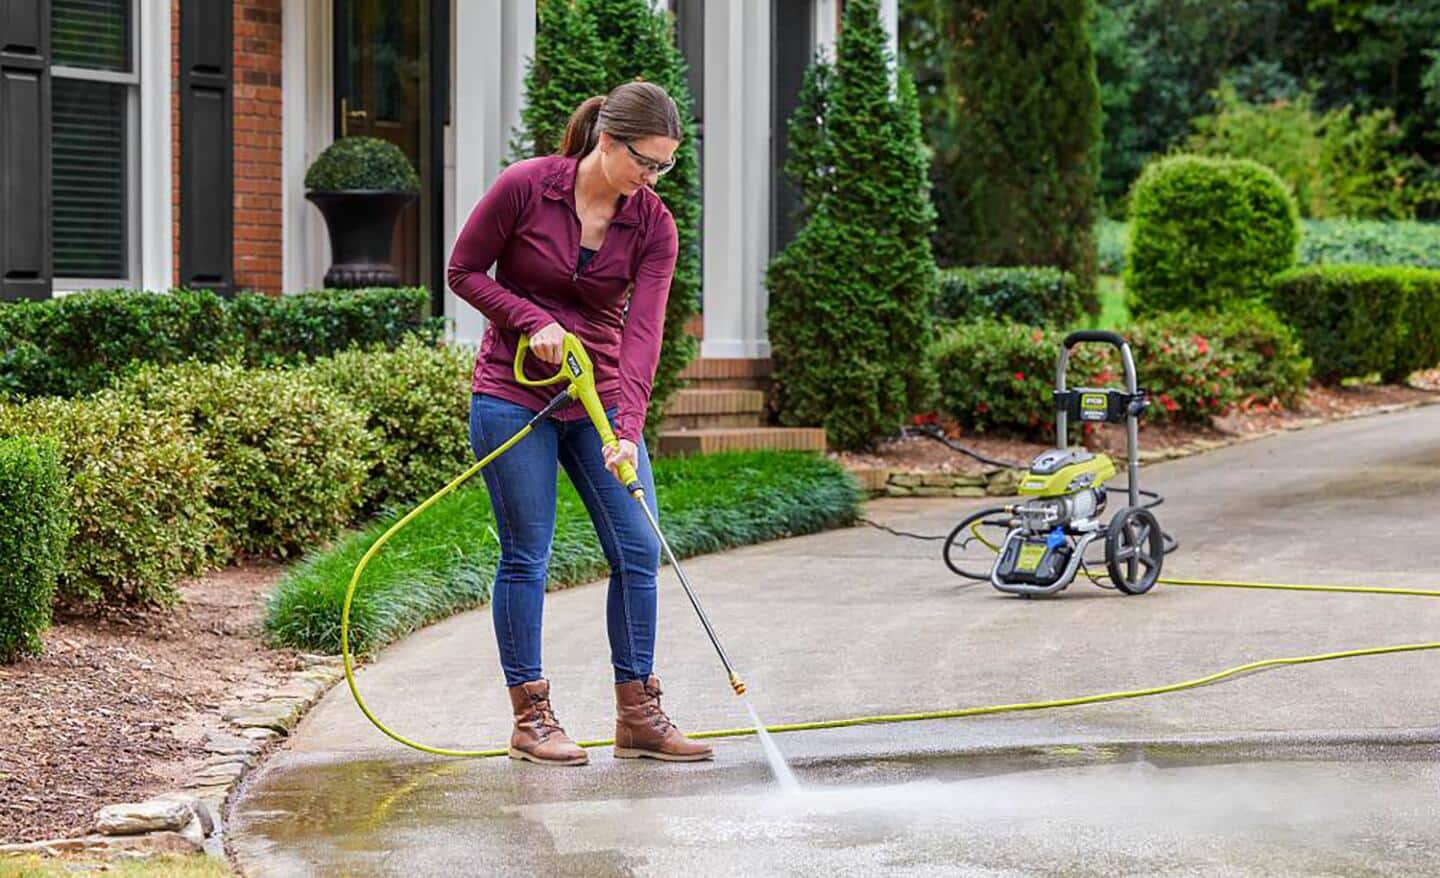 Over 25 Ways to Use a Pressure Washer at Home - How to Use a